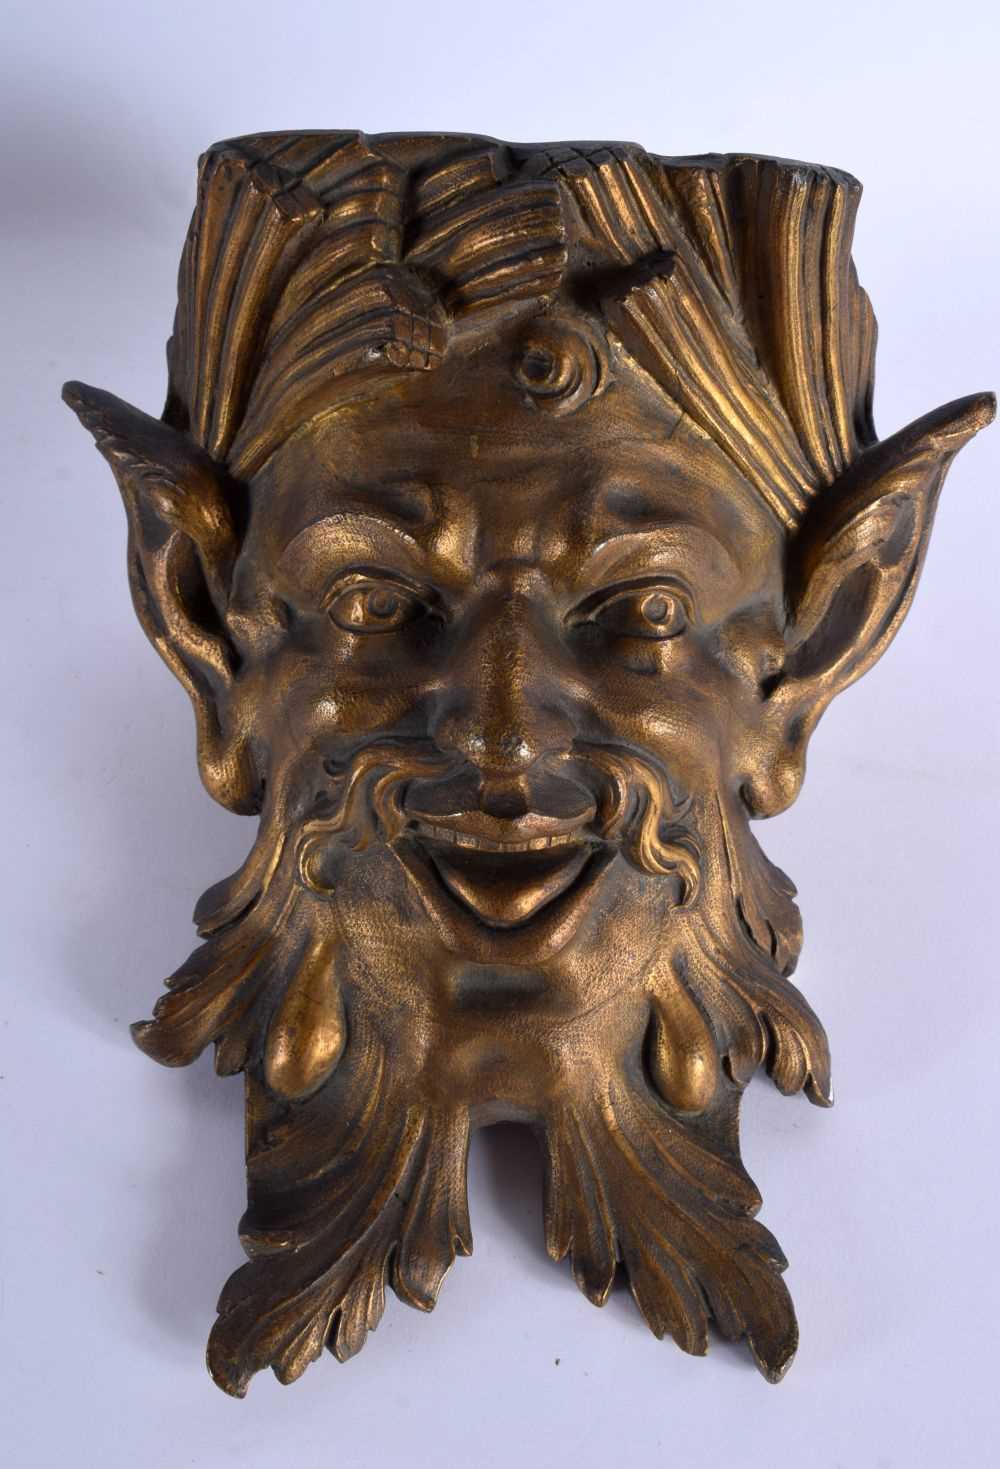 A FINE PAIR OF EARLY 19TH CENTURY FRENCH GILT BRONZE WALL LIGHTS formed as bearded mask head - Image 3 of 6